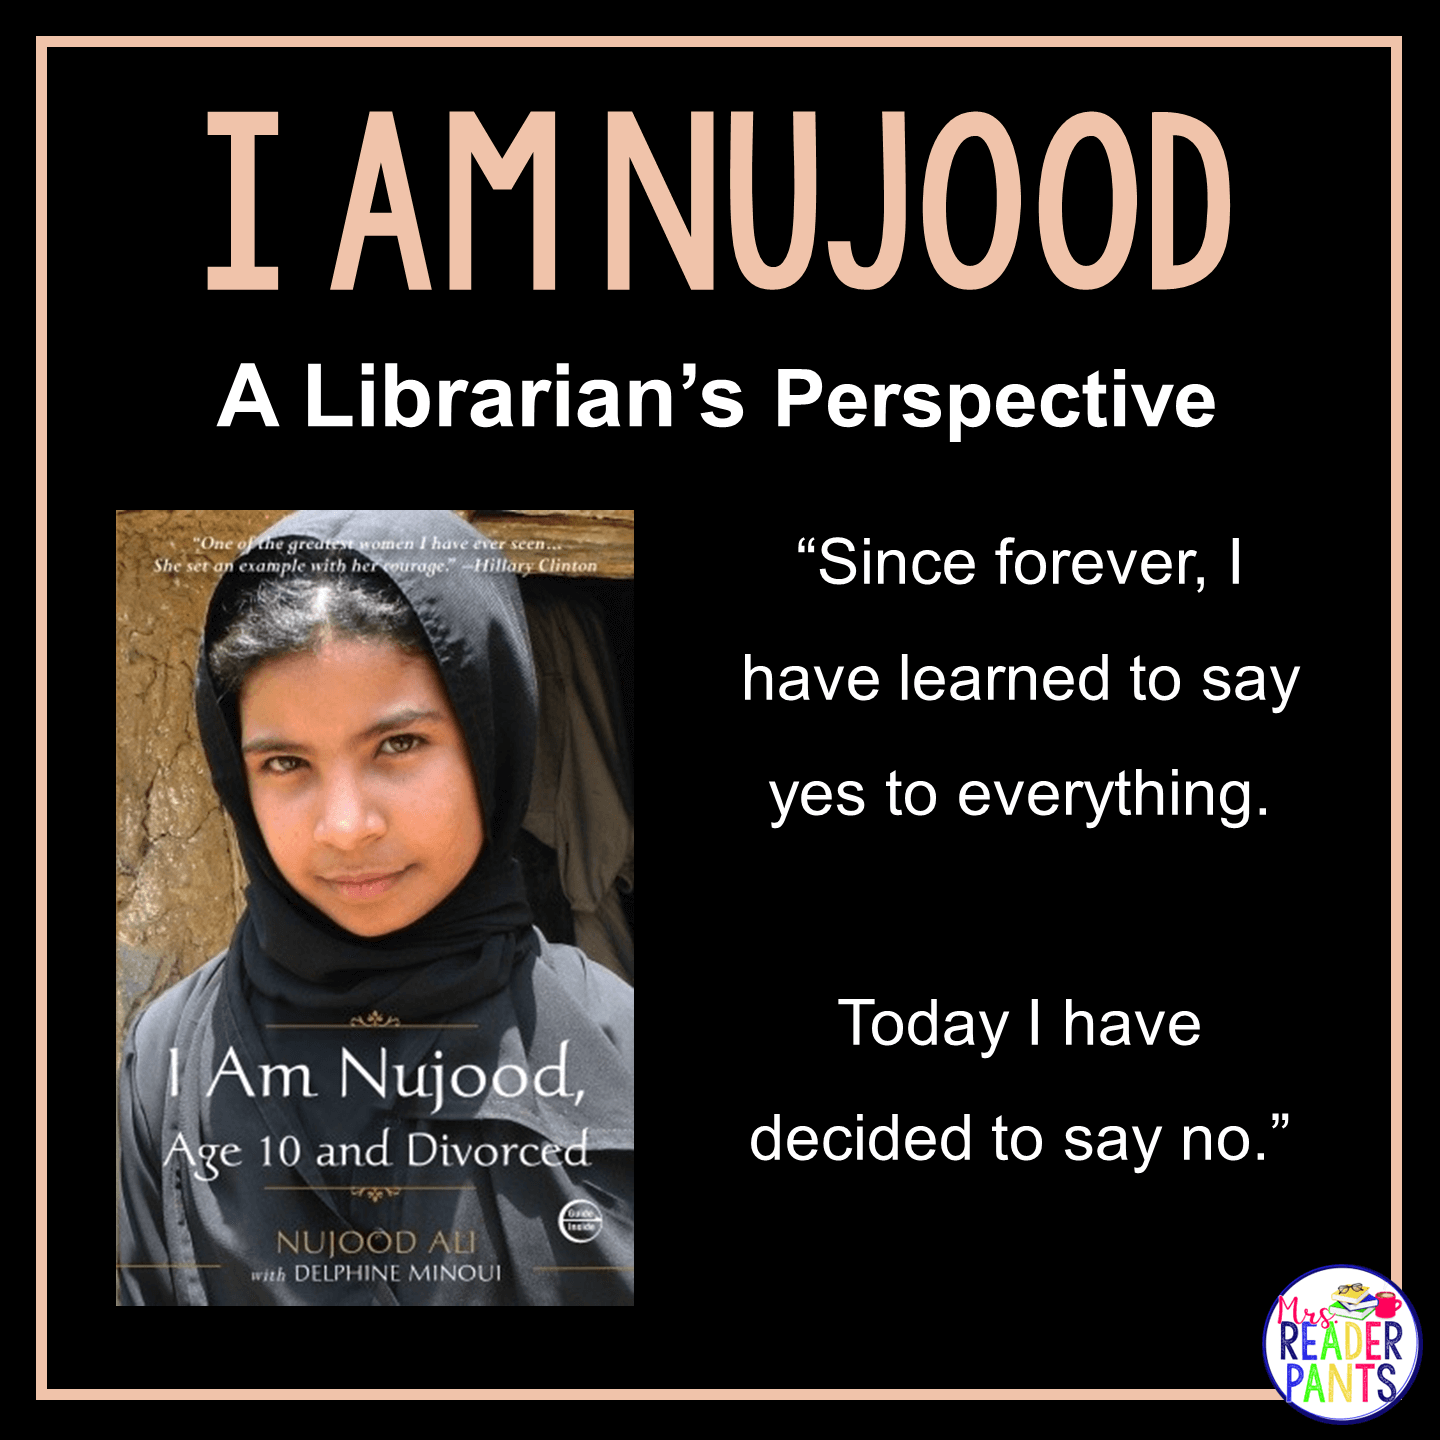 This is a Librarian's Perspective Review of I Am Nujood by Nujood Ali and Delphine Minoui.